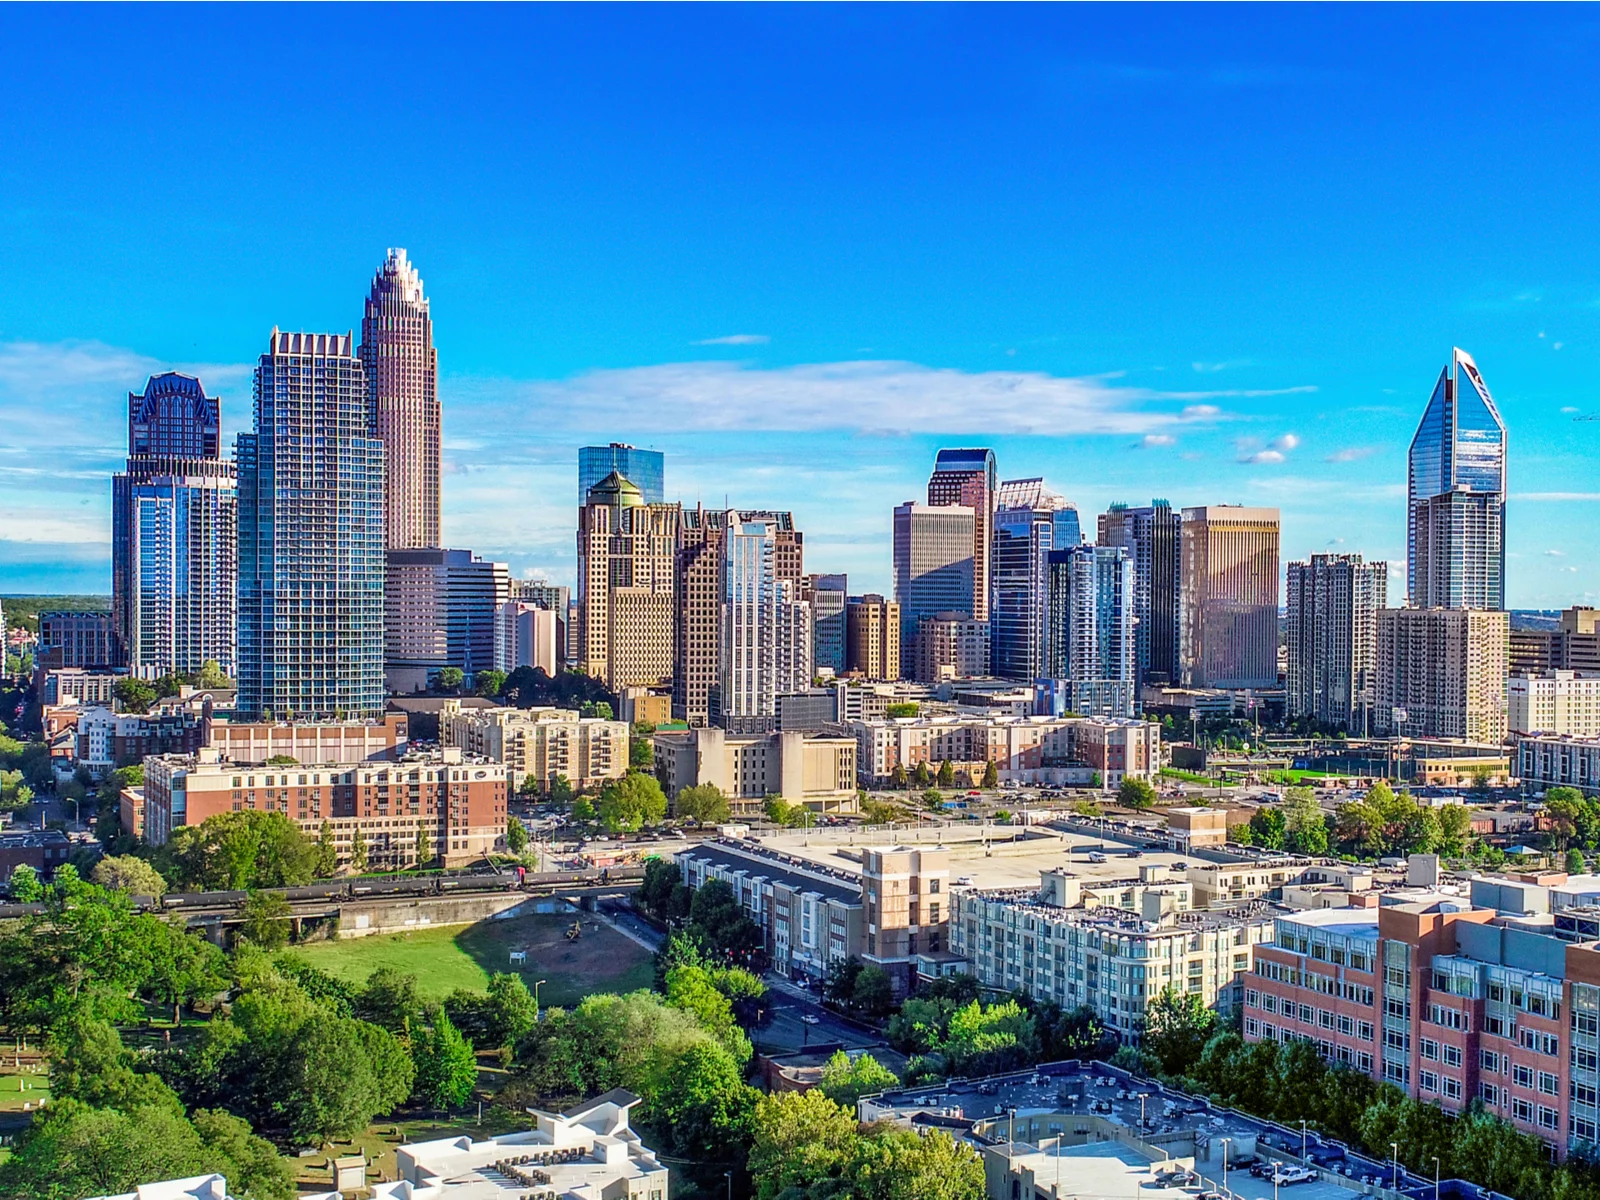 an aerial shot in a clear day showing the best things to do in charlotte, nc with its tall buildings and rich city